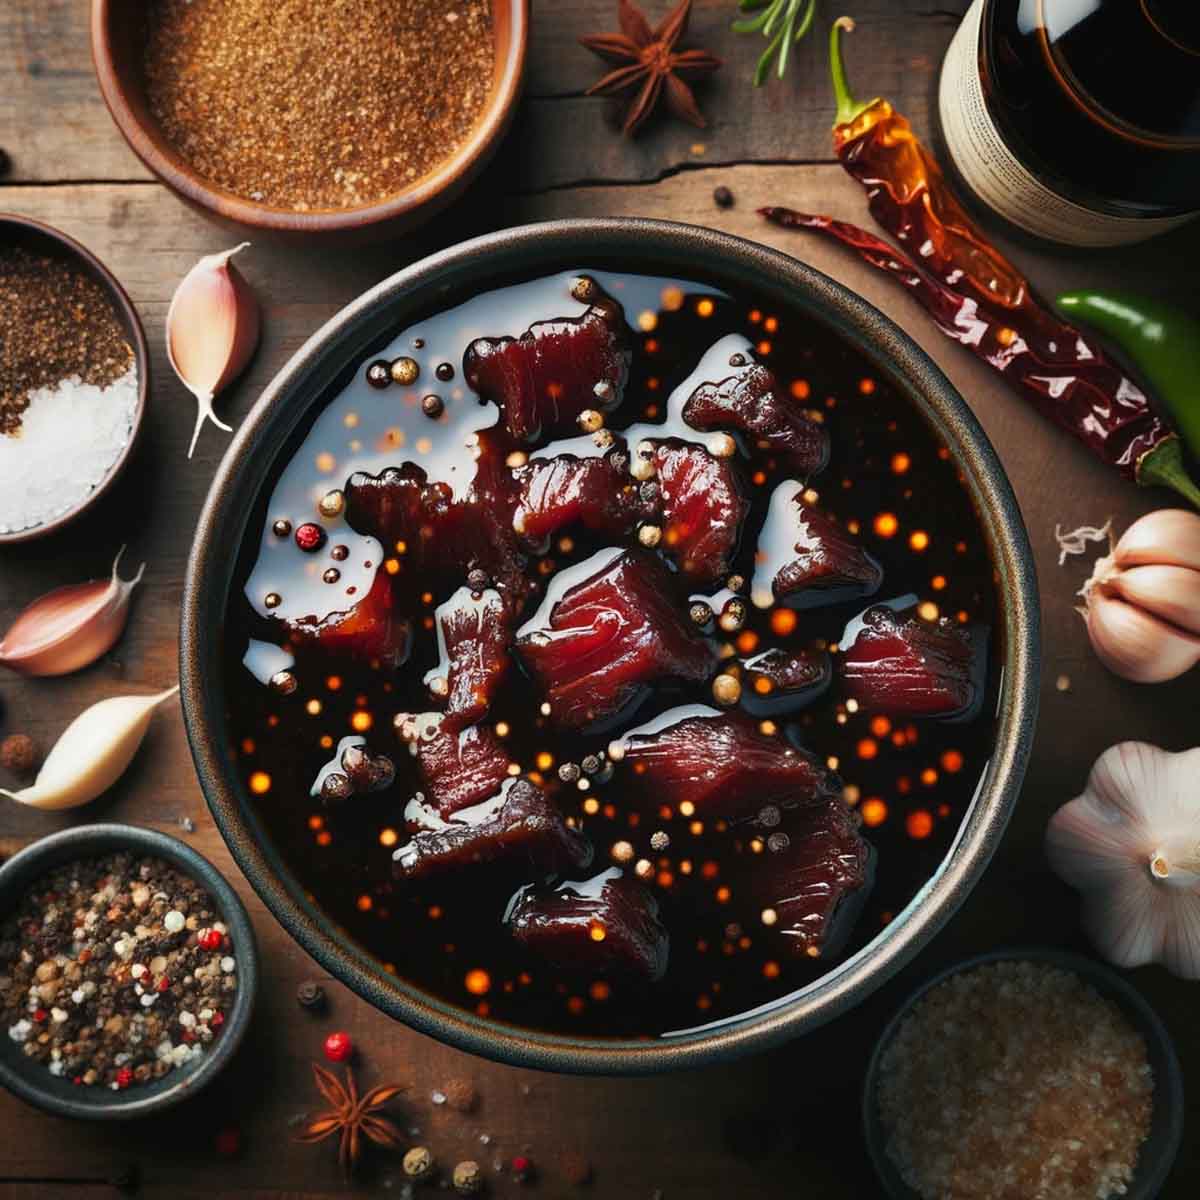 Overhead view of a bowl with dark, glossy beef jerky marinade, surrounded by ingredients like Worcestershire and soy sauce on a wooden table.